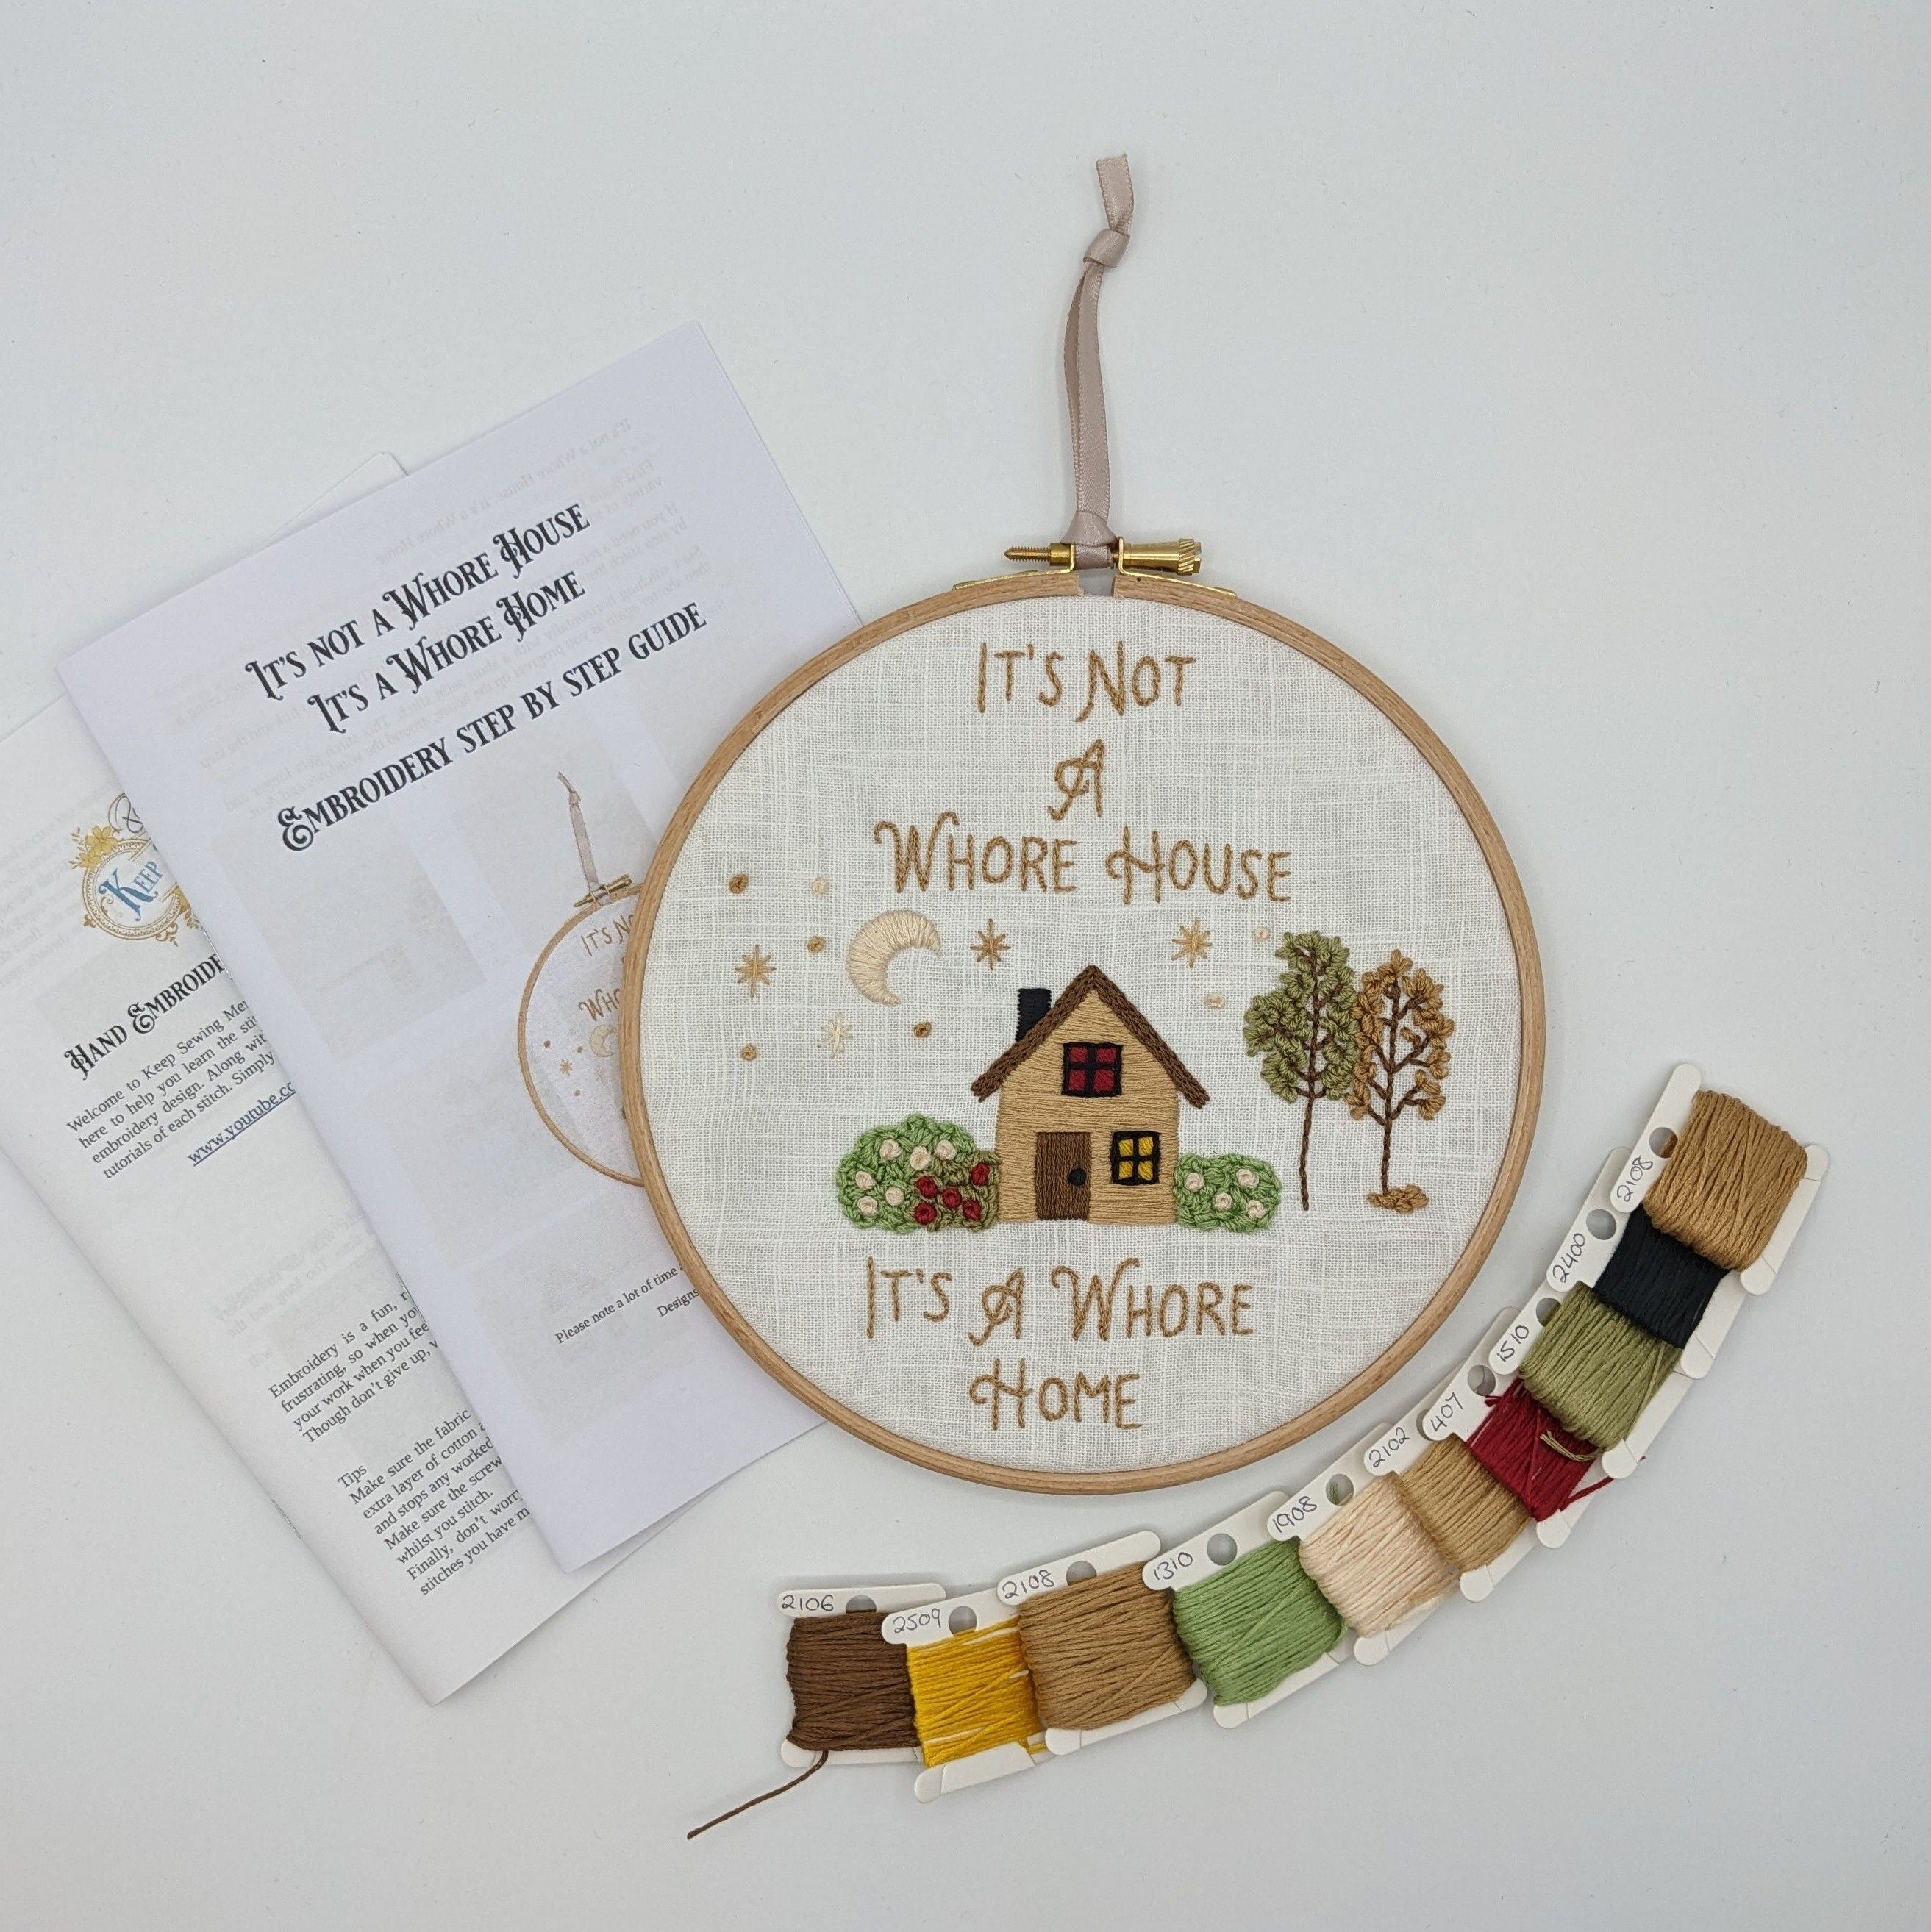 Hand Embroidery Kit- It's not a whore house, It's a whore home'. Sassy, alternative vintage style hand embroidery.